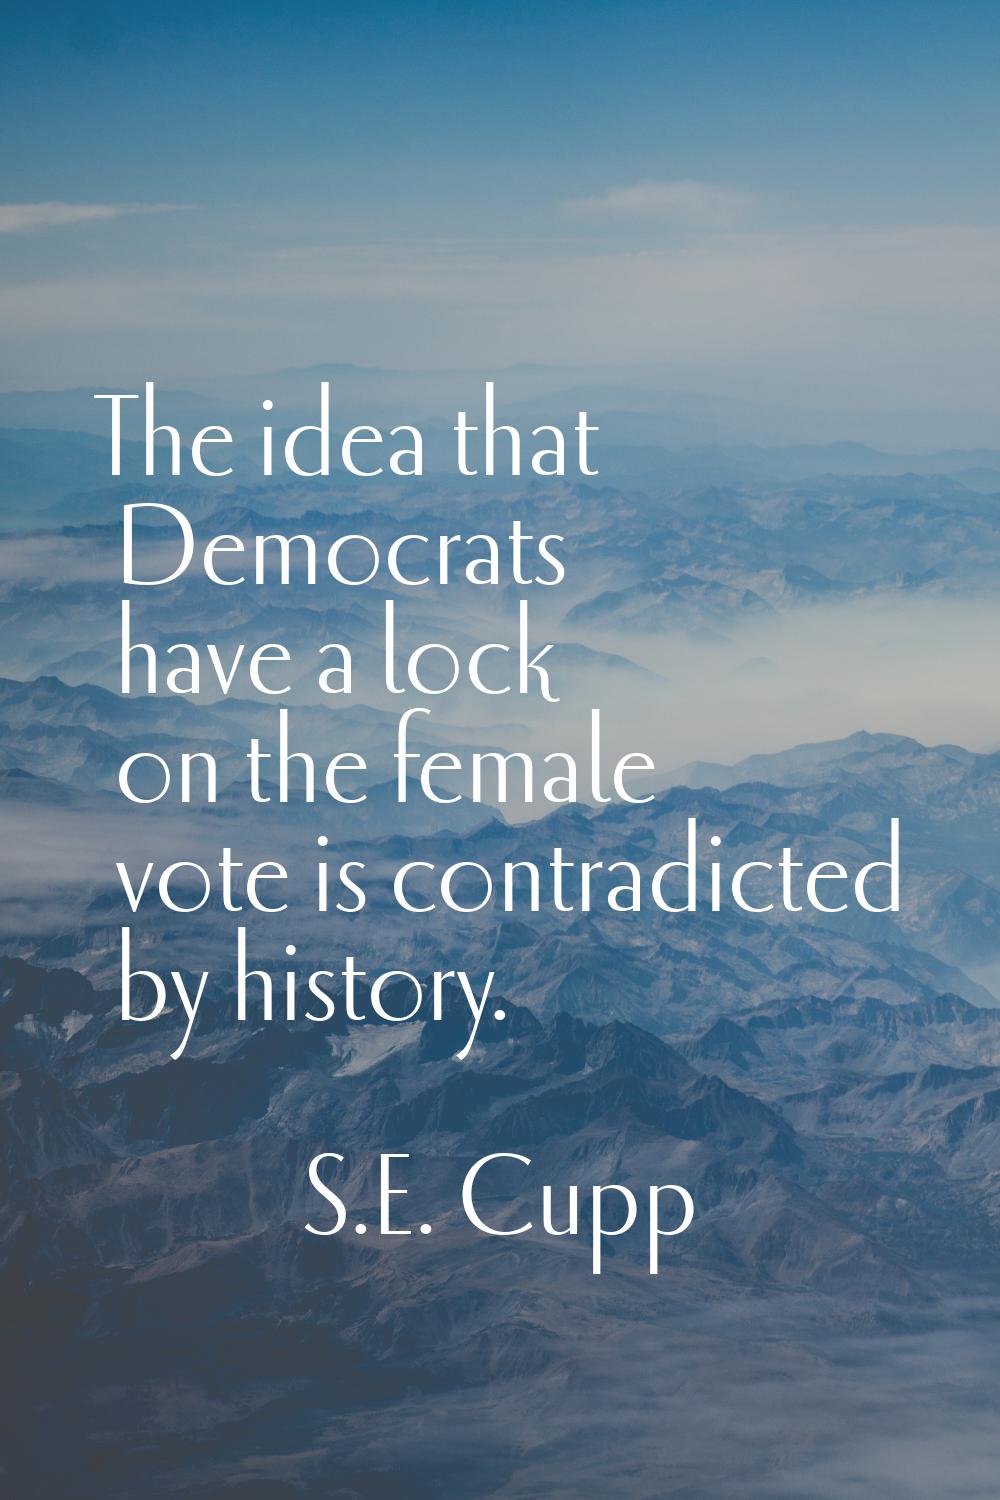 The idea that Democrats have a lock on the female vote is contradicted by history.